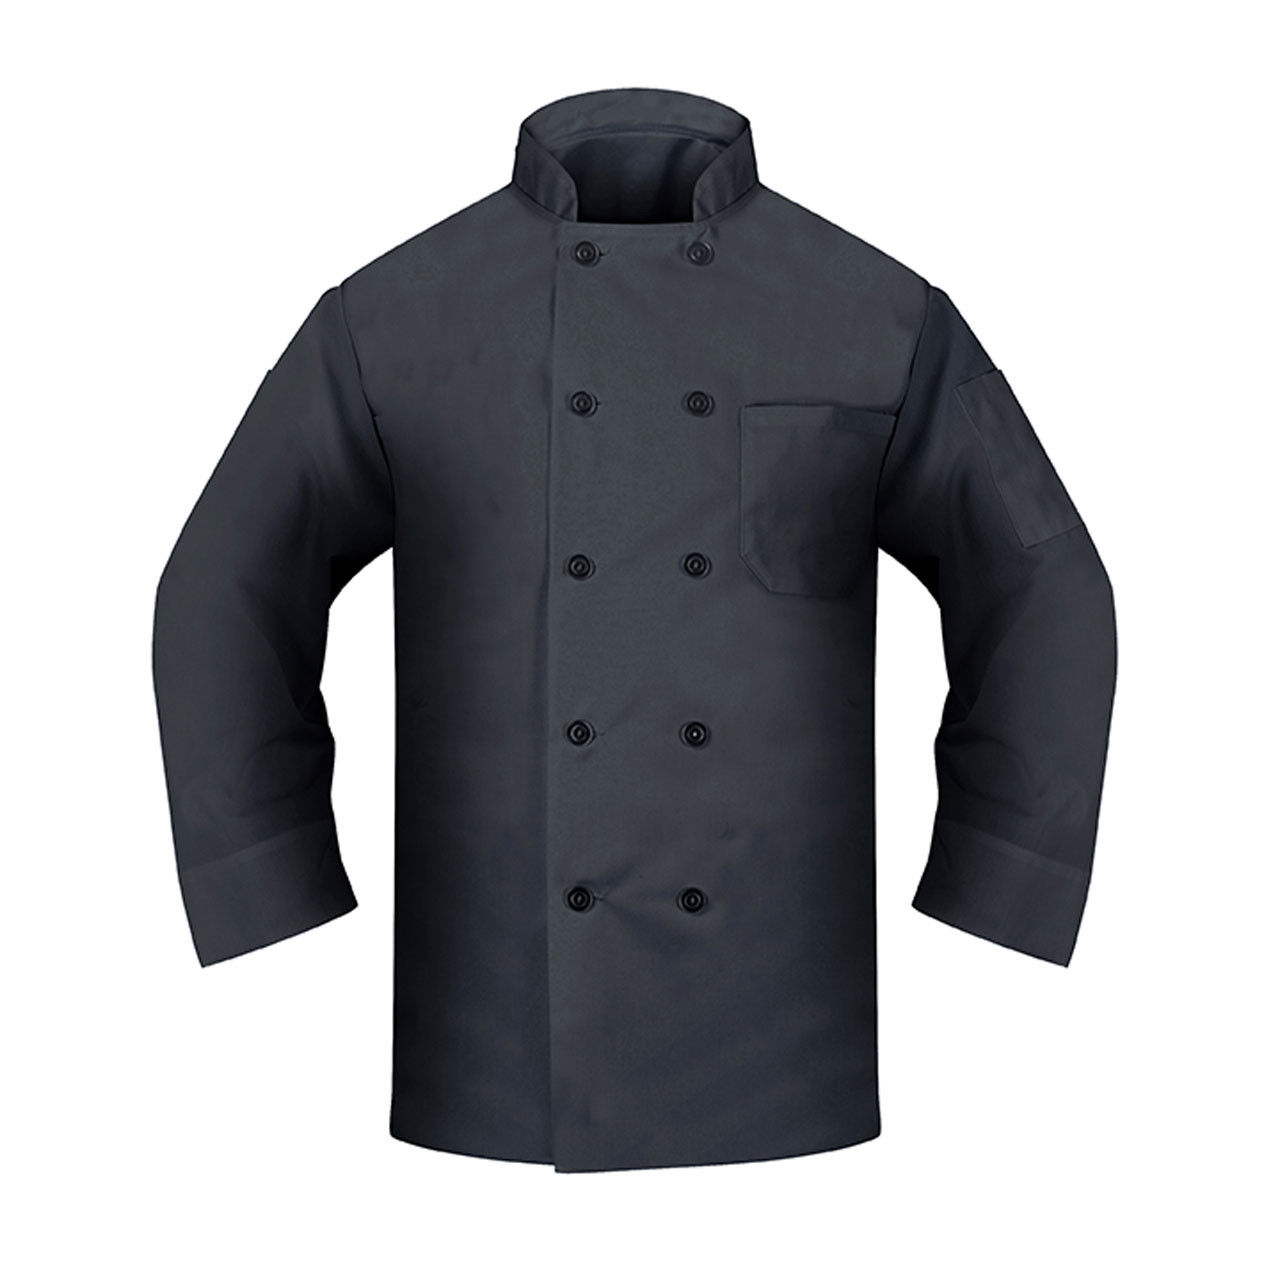 How heavy is the fabric of the black chef coats I'm planning to buy?